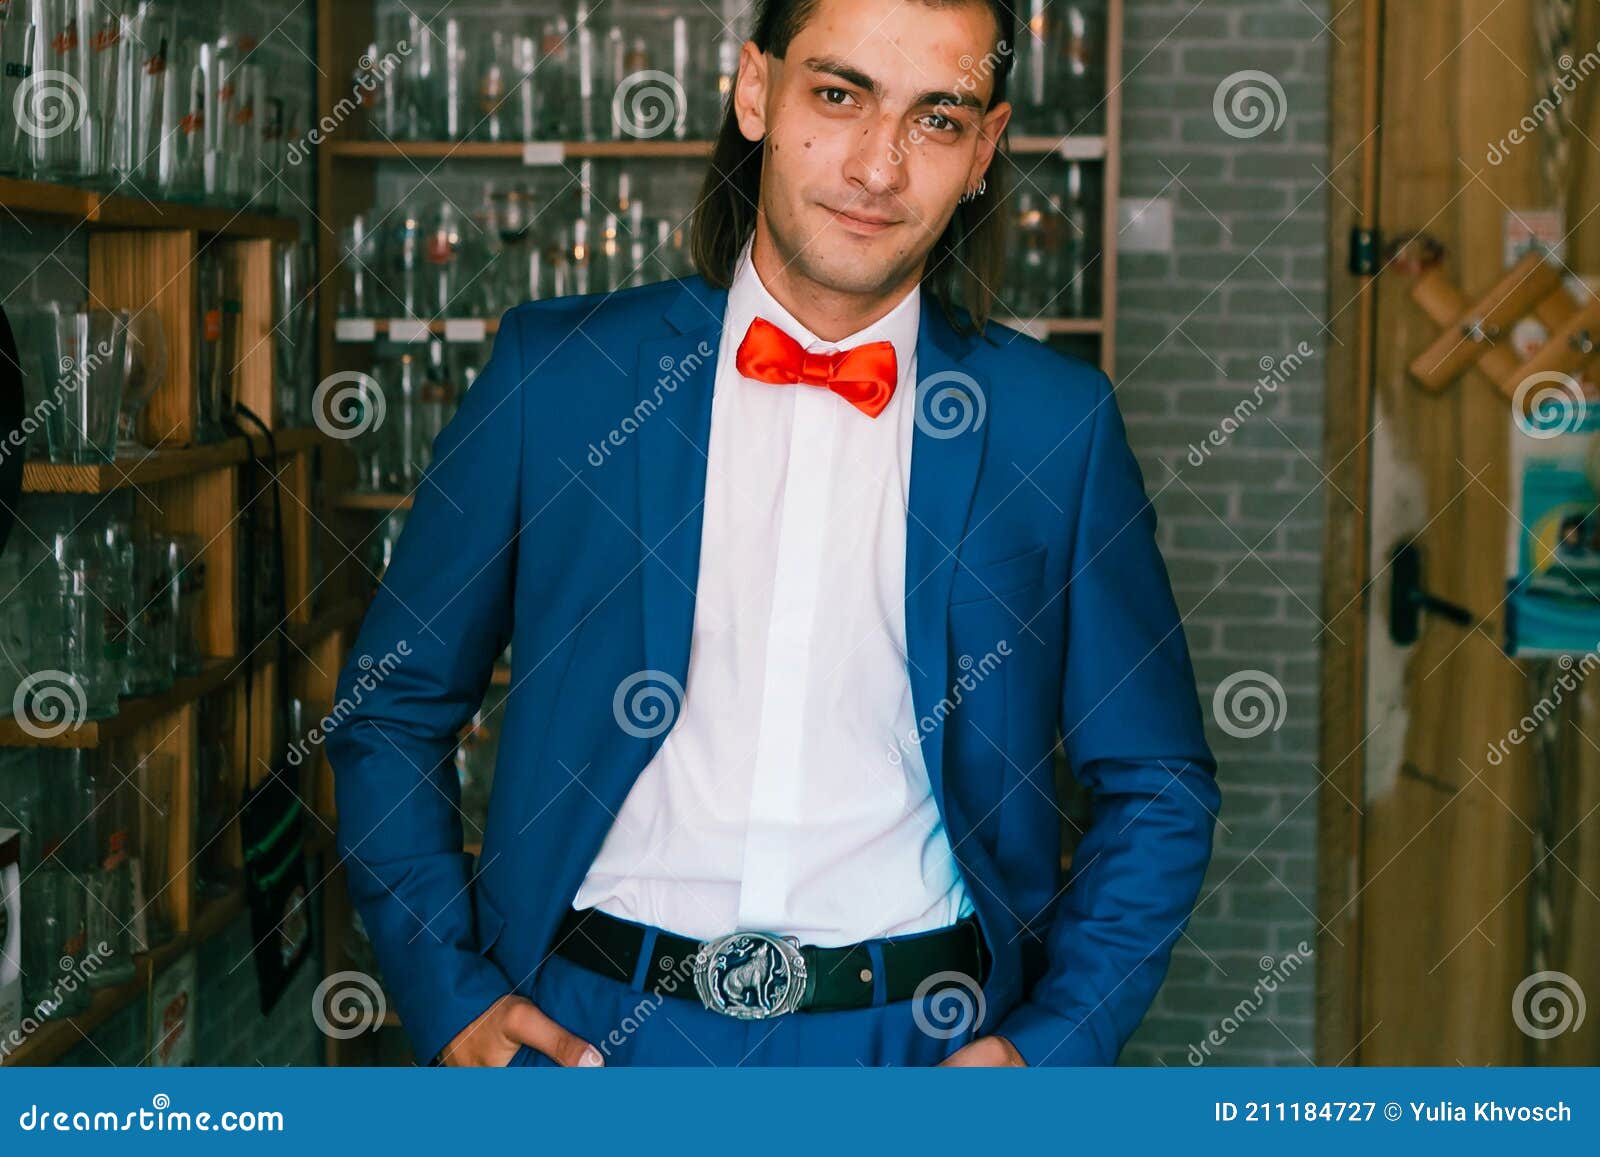 Portrait of Young Handsome in Blue Suit with Red Bow Image - Image of look: 211184727